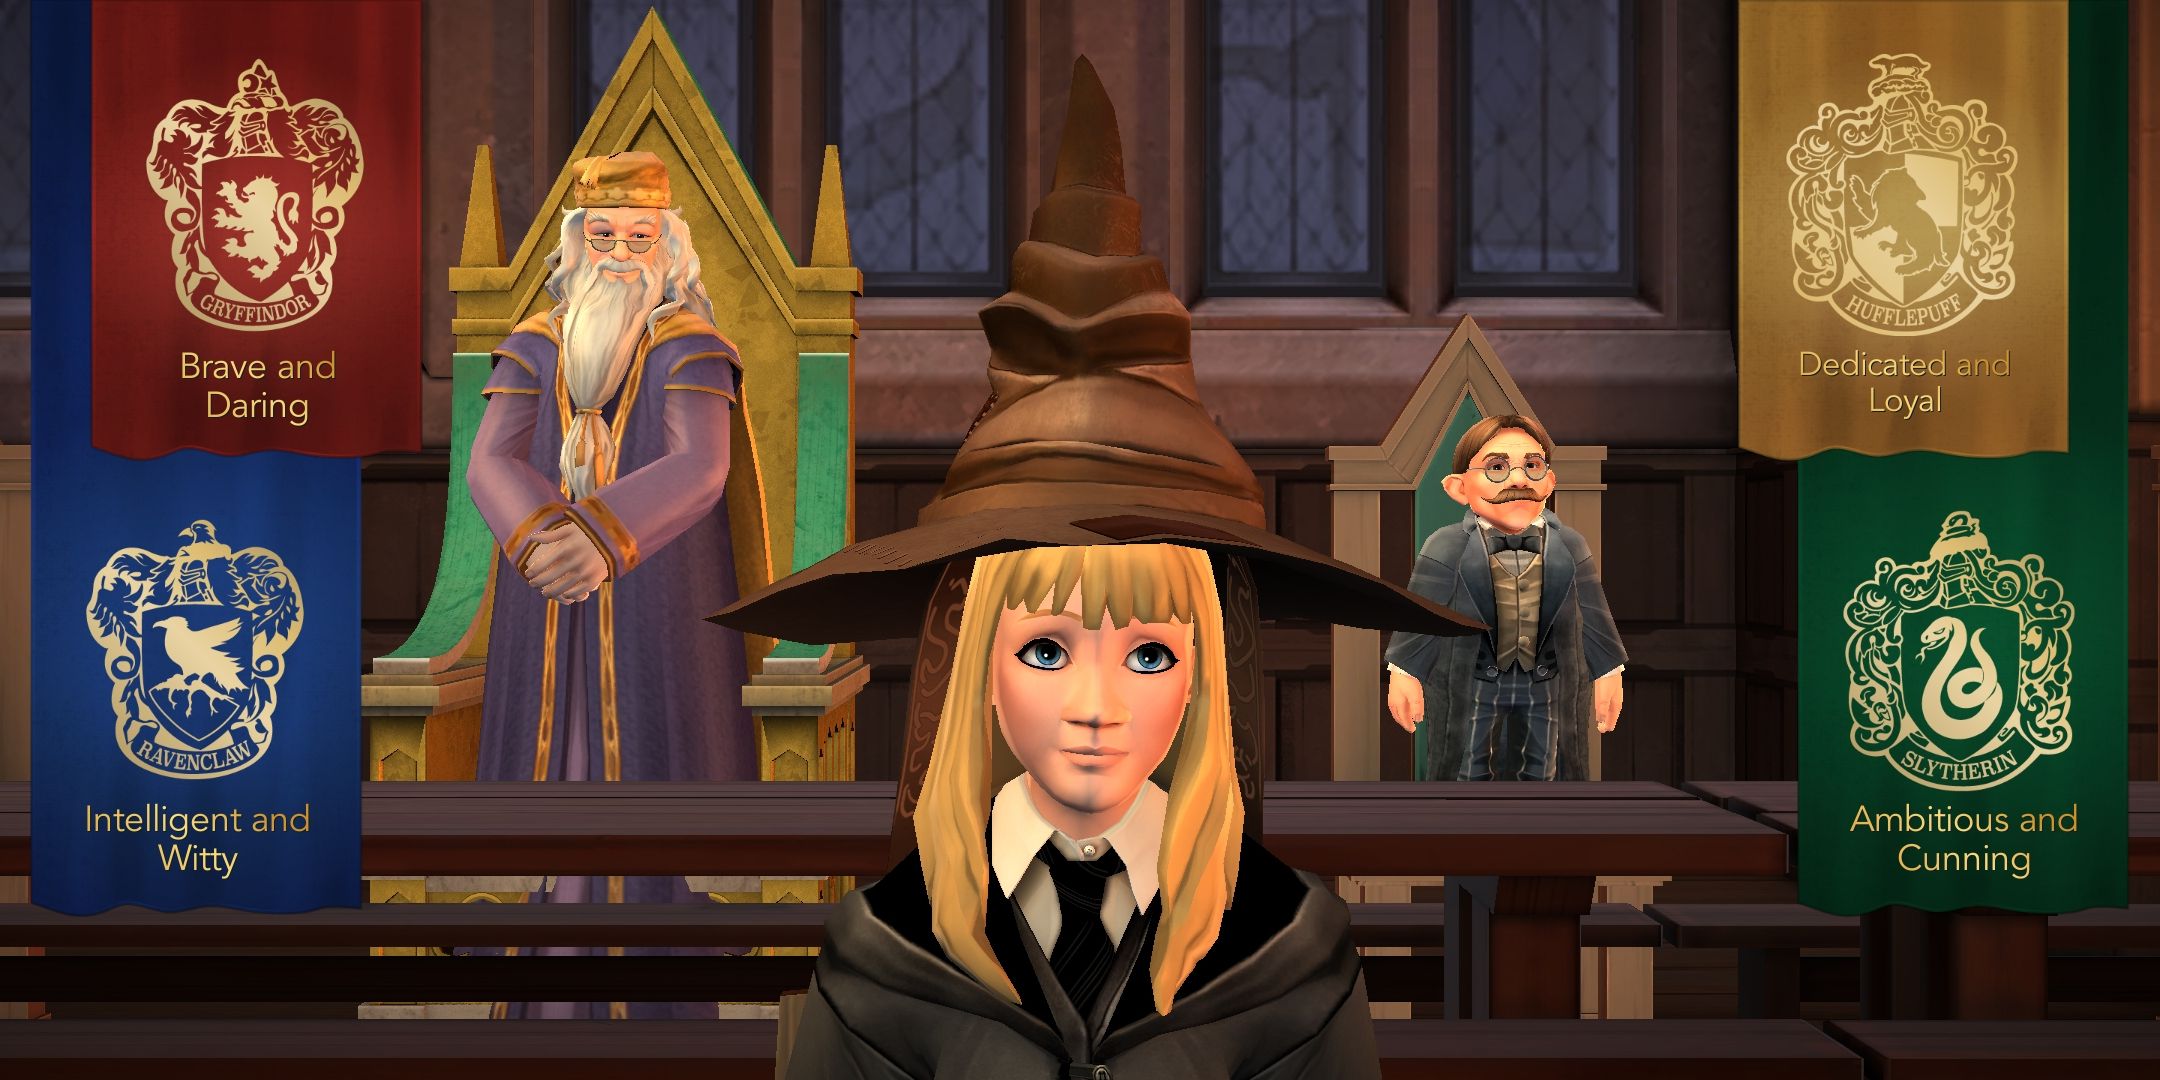 Harry Potter: Hogwarts Mystery announces new expansion